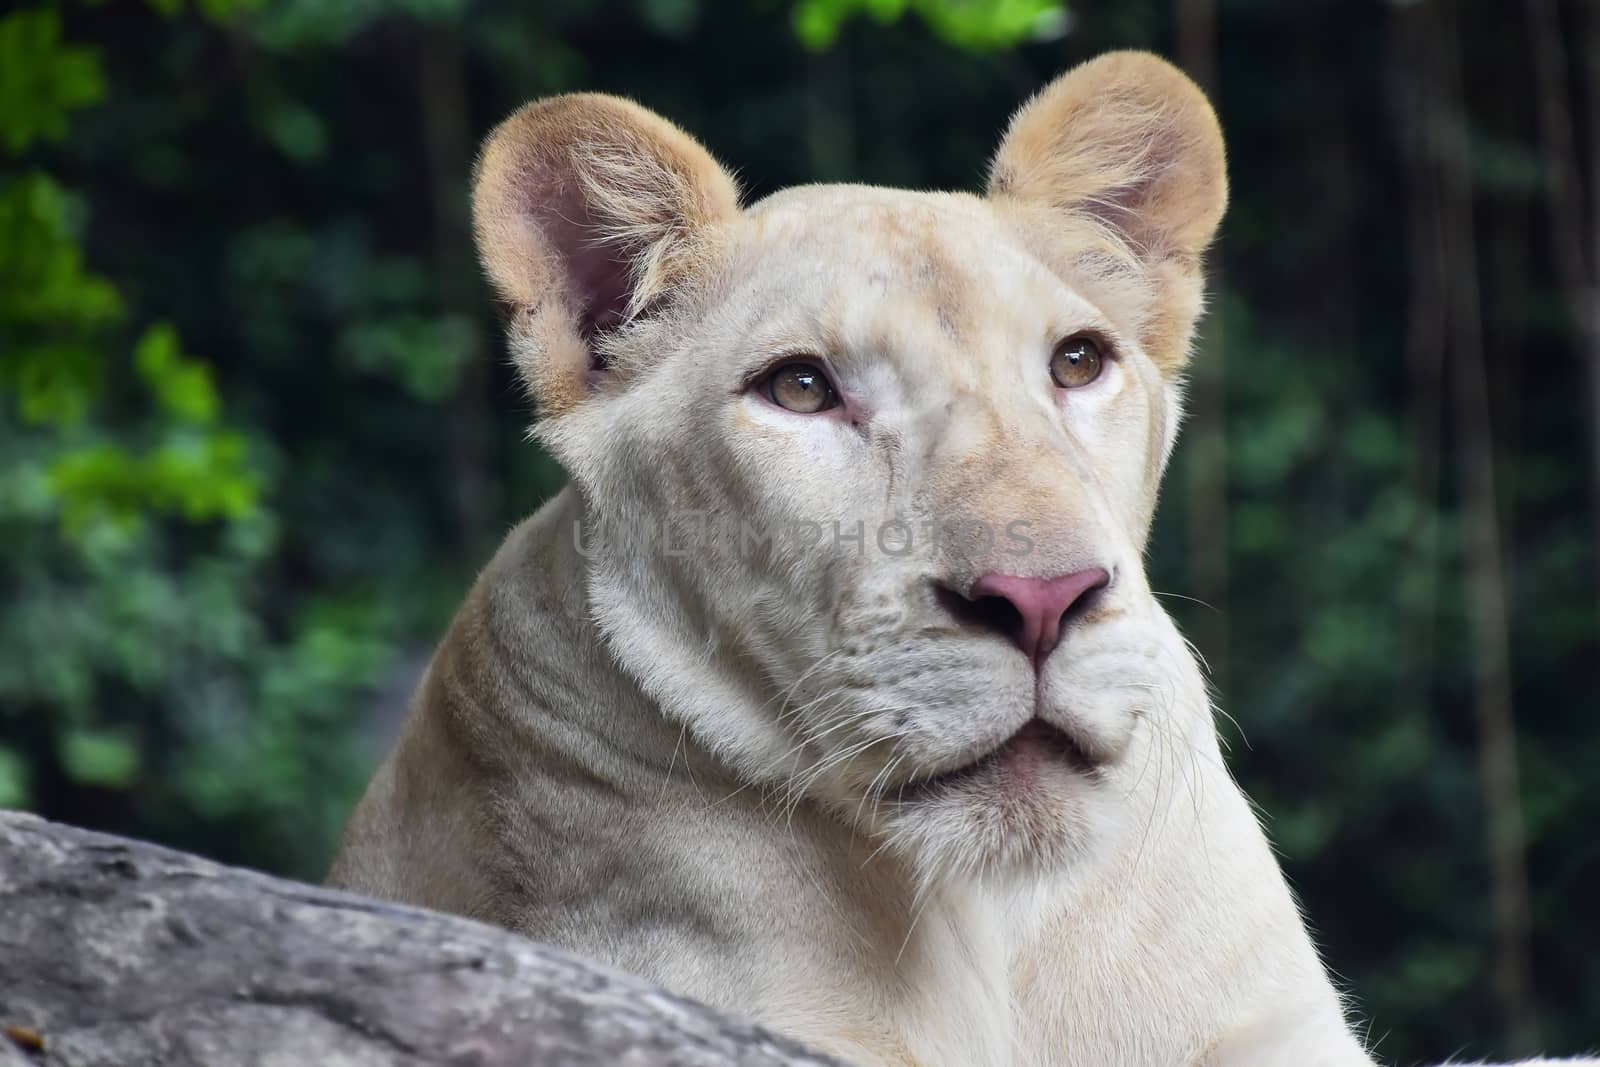 Young white lioness close up portrait in zoo environment